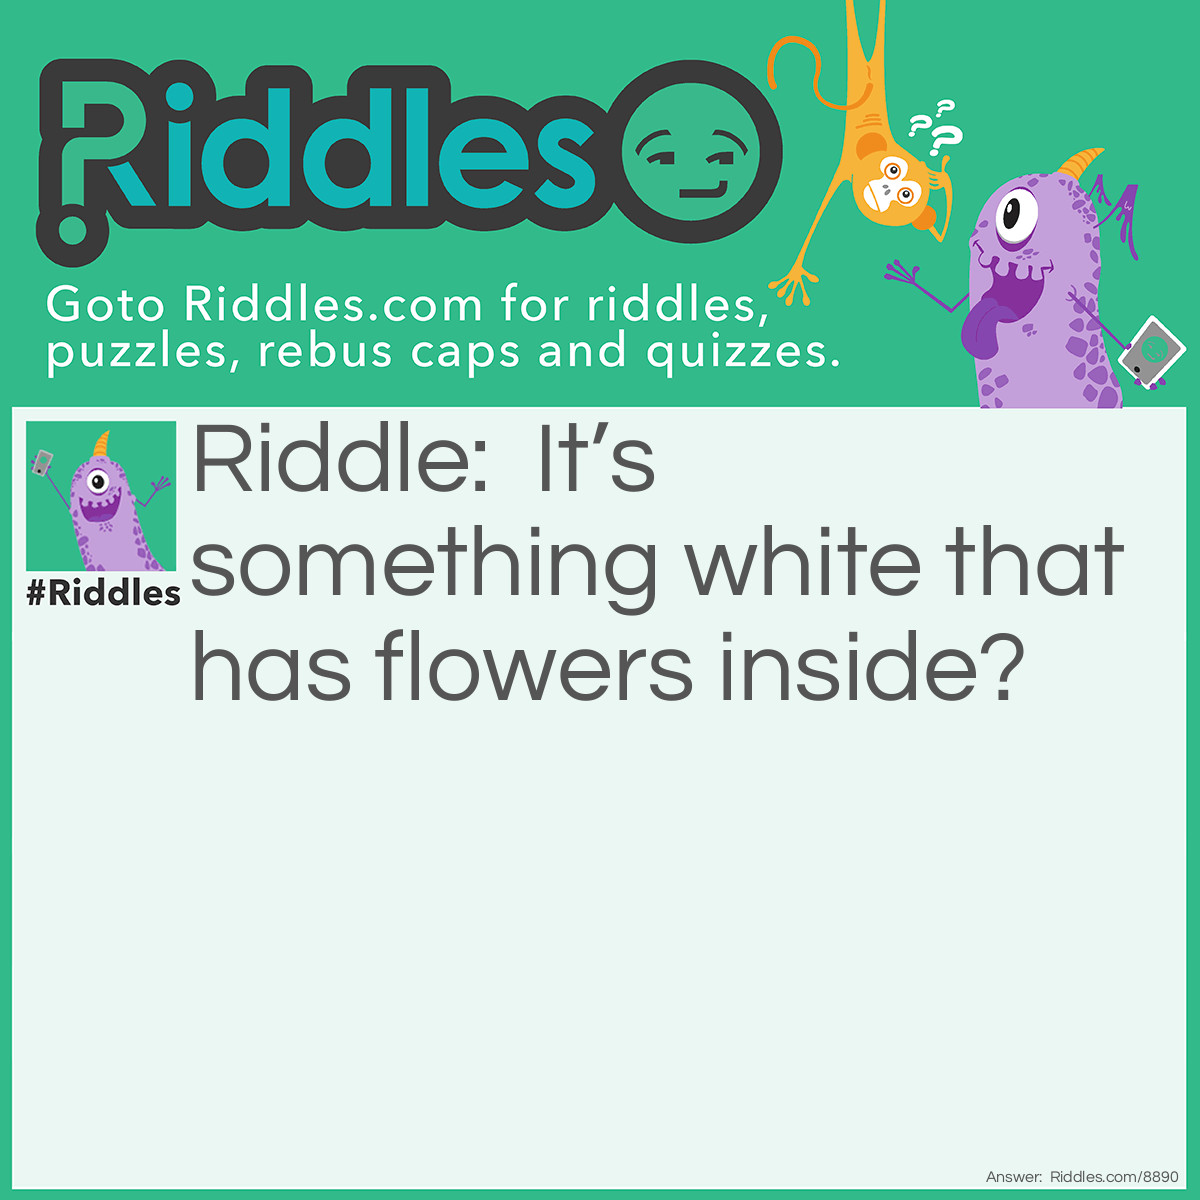 Riddle: It's something white that has flowers inside? Answer: Unanswered.